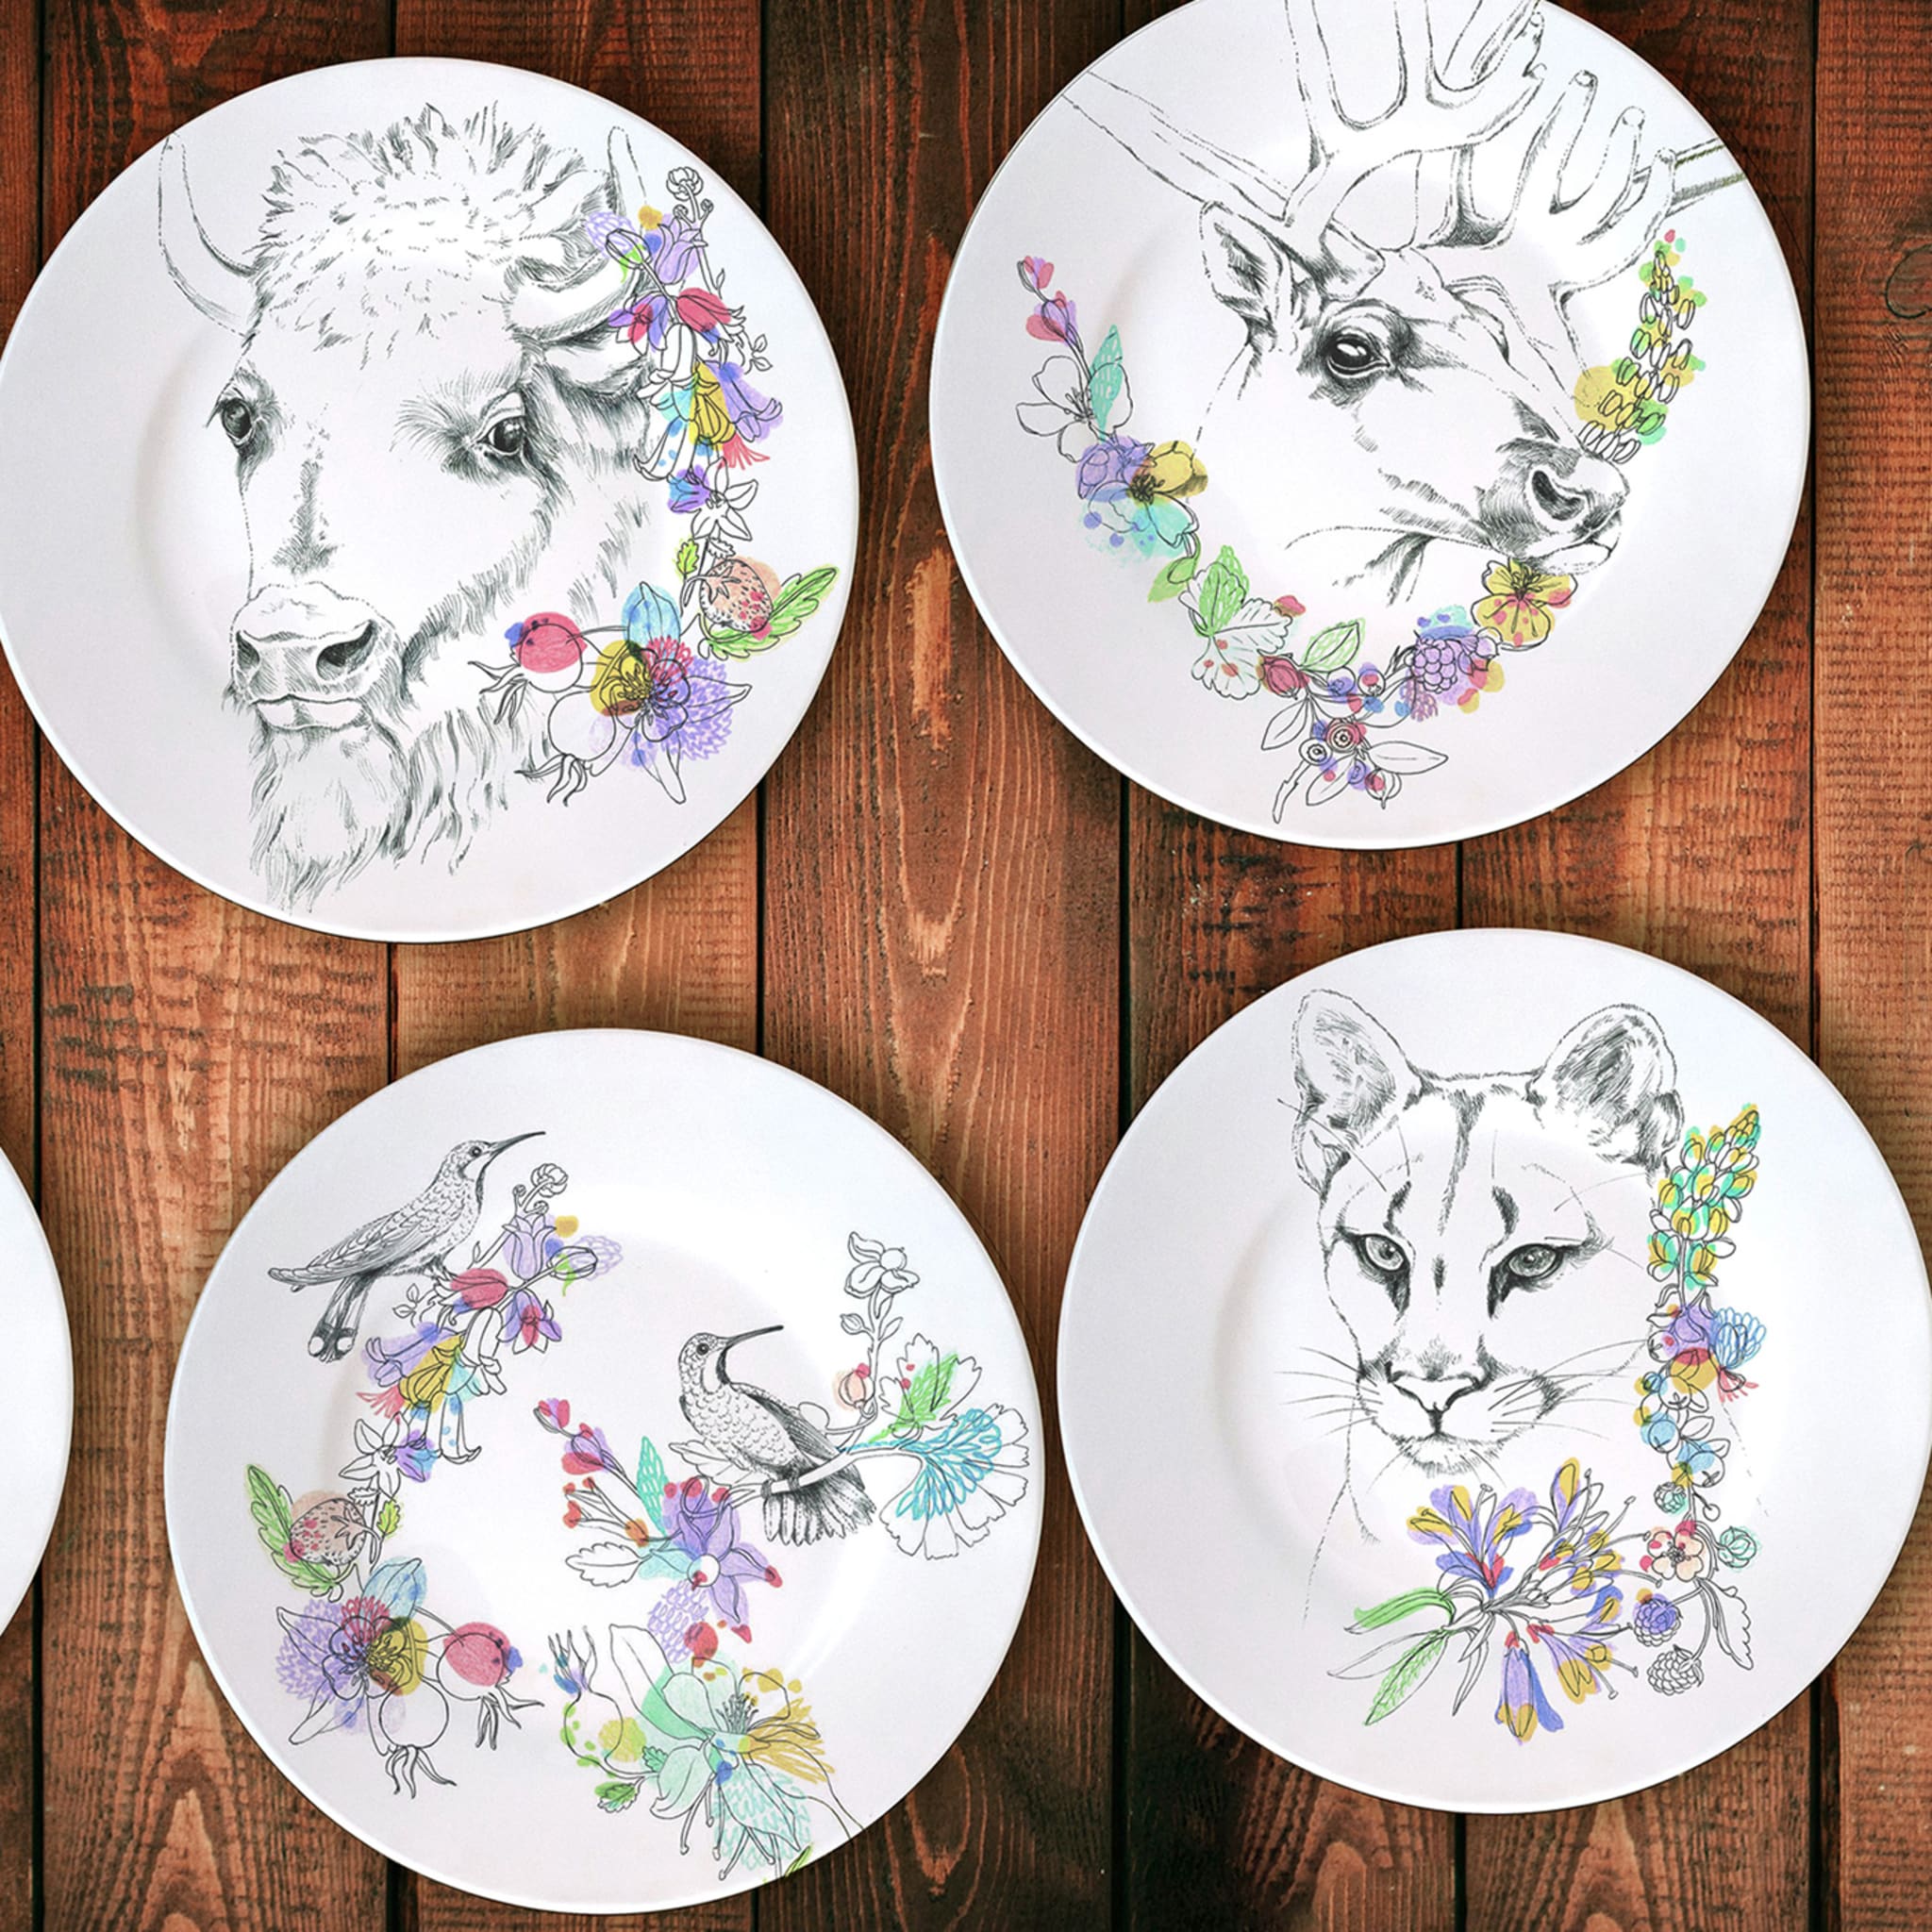 An Ode To The Woods Mountain Lion Dinner Plate - Alternative view 1